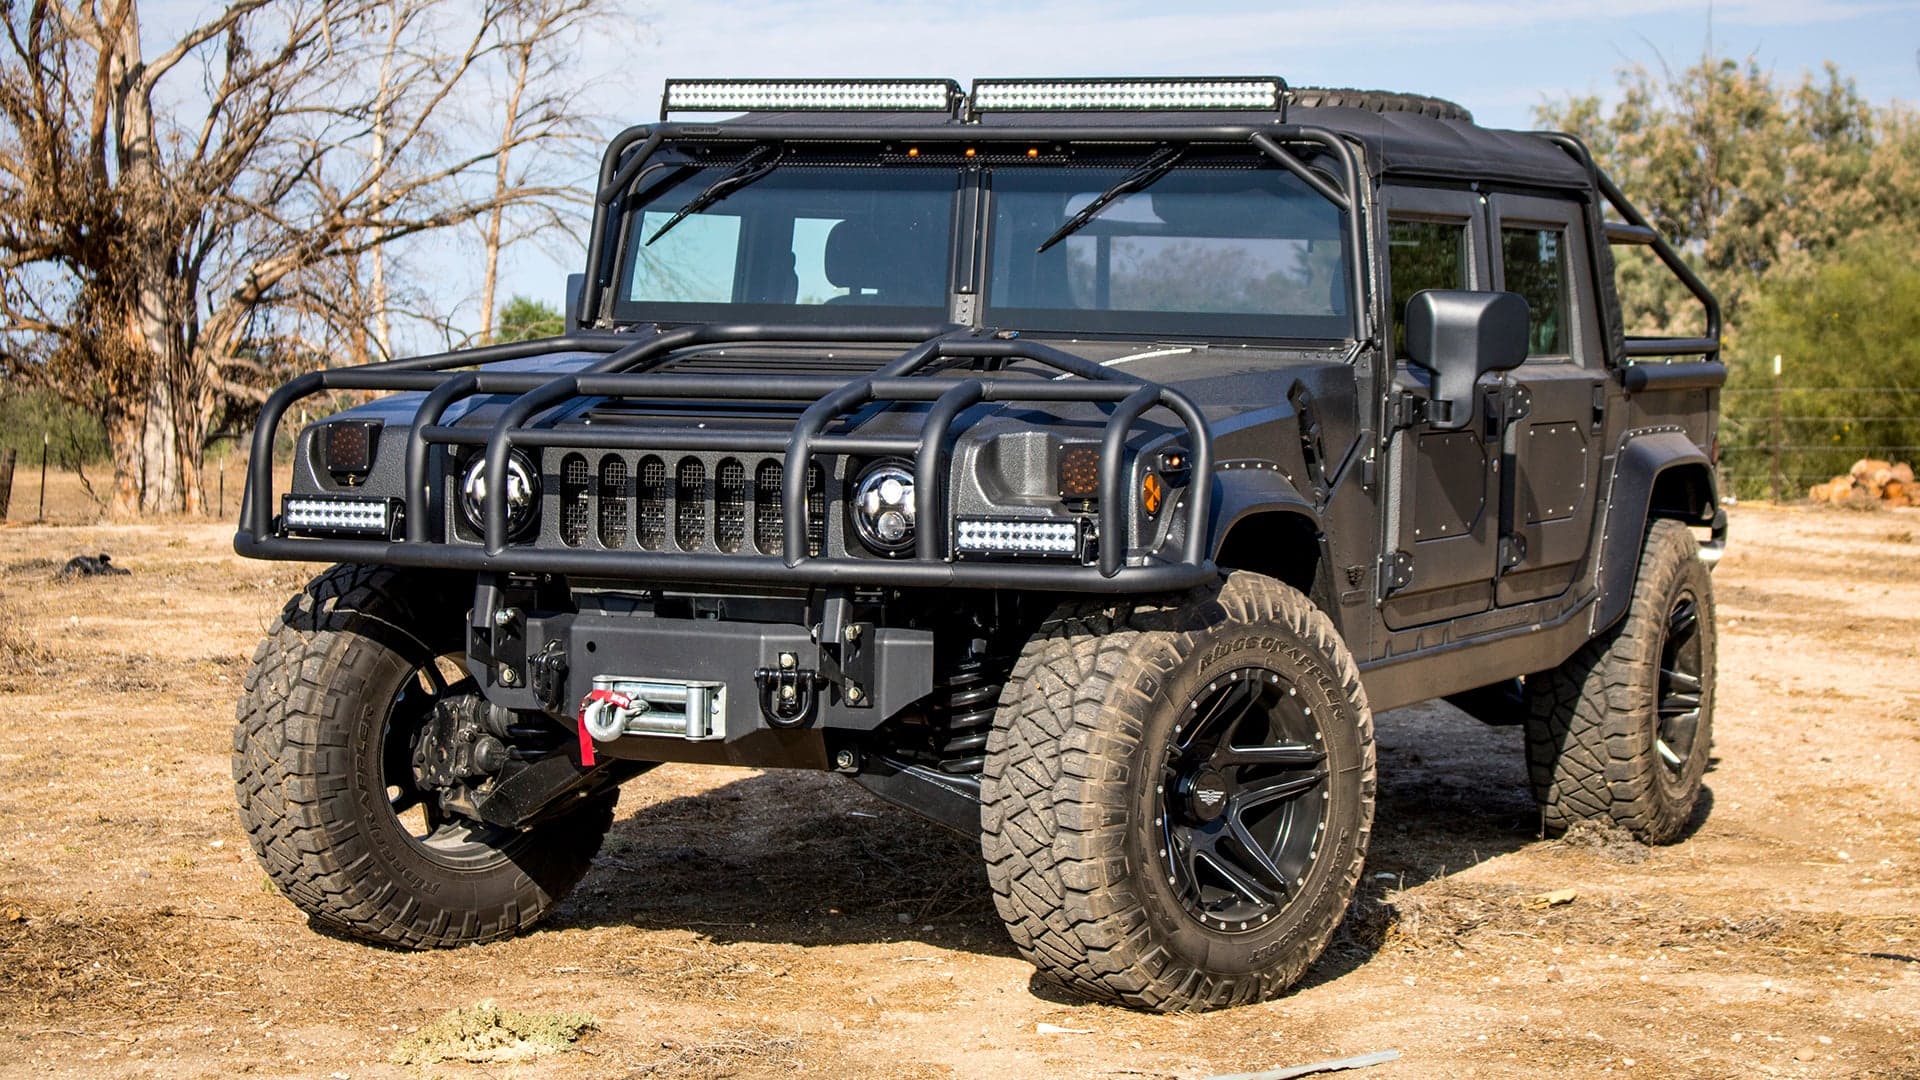 Mil-Spec Hummer H1 Review: The Glory of a Bespoke, $250,000 Hummer With 1,000 Pound-Feet of Torque